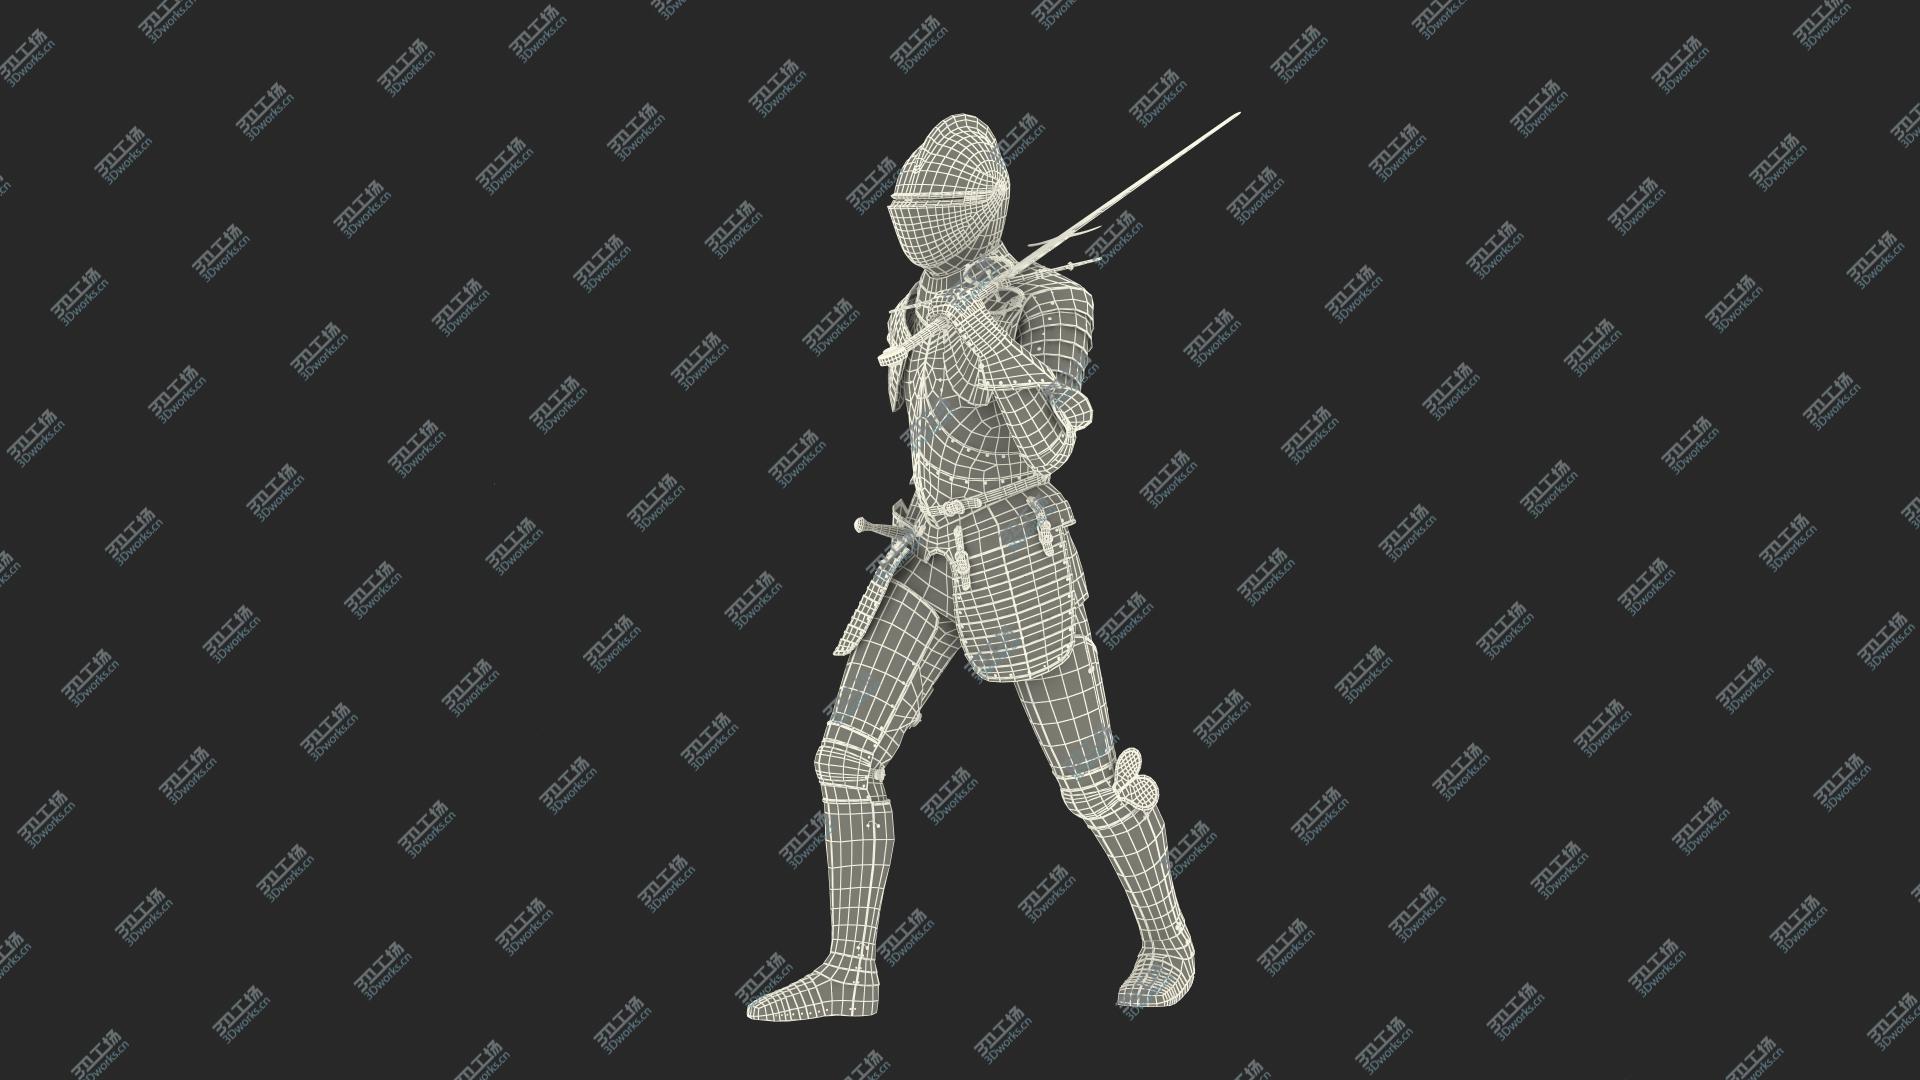 images/goods_img/20210313/3D Polished Knight Plate Armor Walking Pose/4.jpg